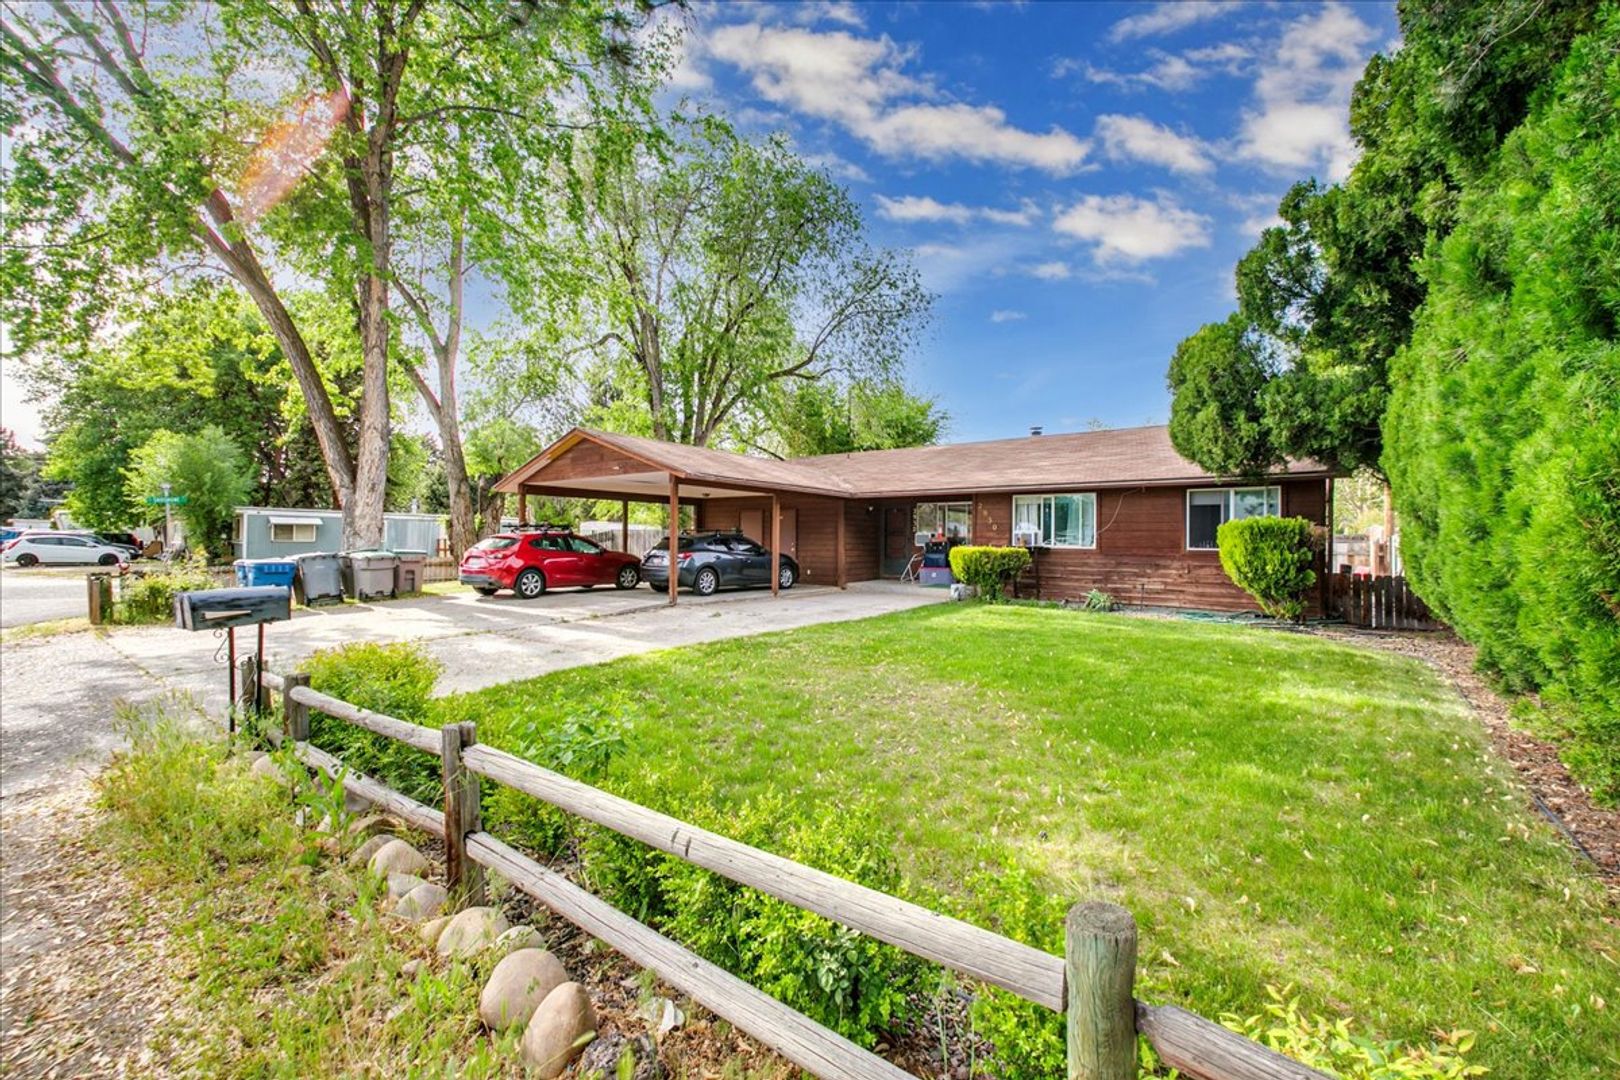 3 bed 1 bath Home on the Boise Bench!